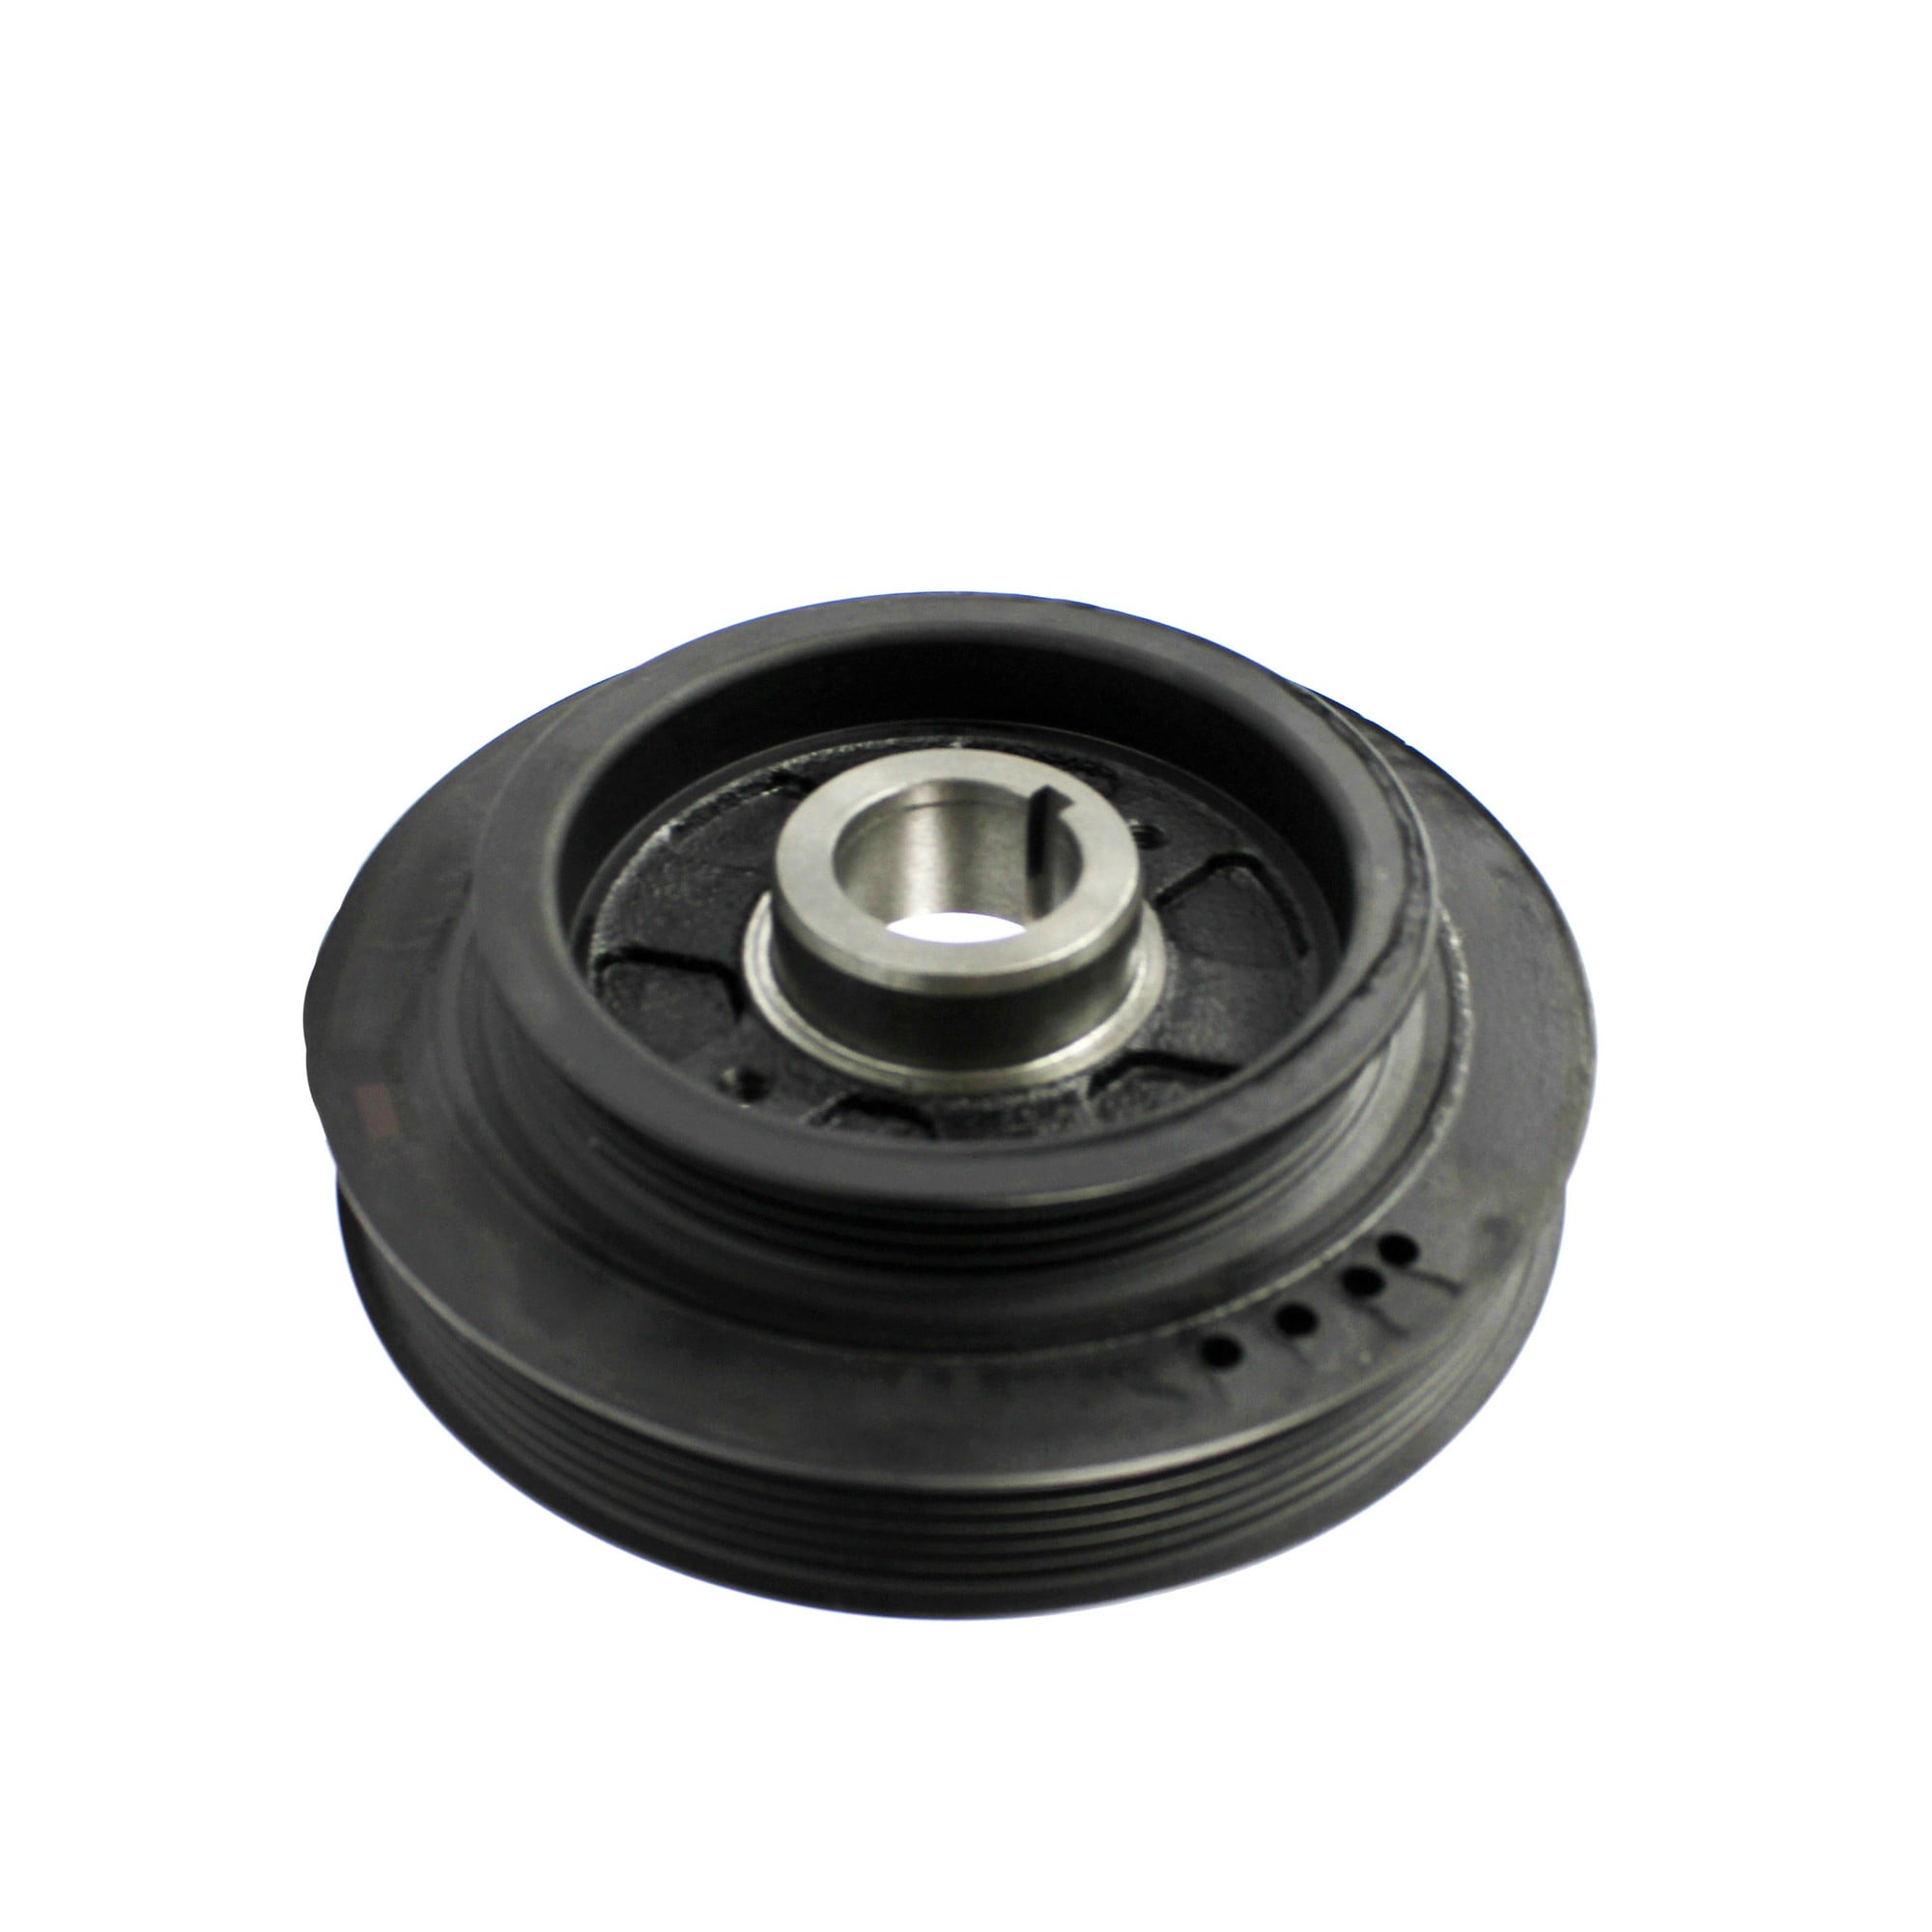 Harmonic Balancer & Belt Drive Pulley Compatible with Nissan 200SX Sentra 1.6L 